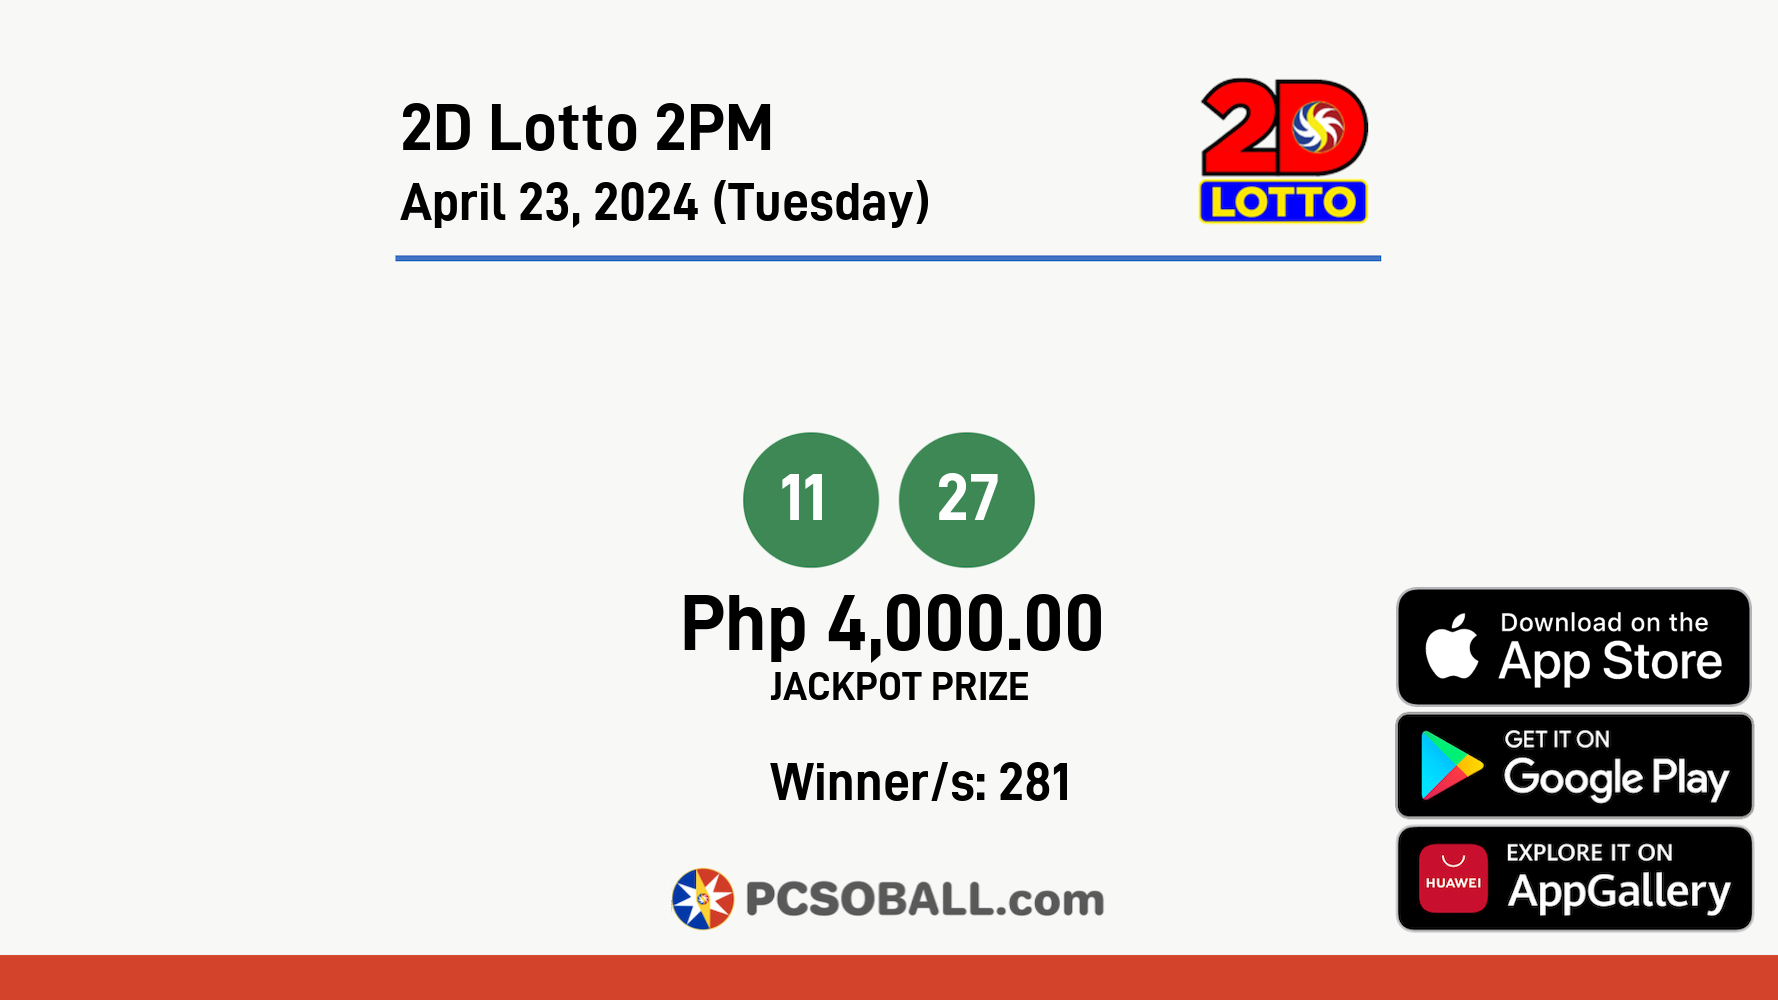 2D Lotto 2PM April 23, 2024 (Tuesday) Result